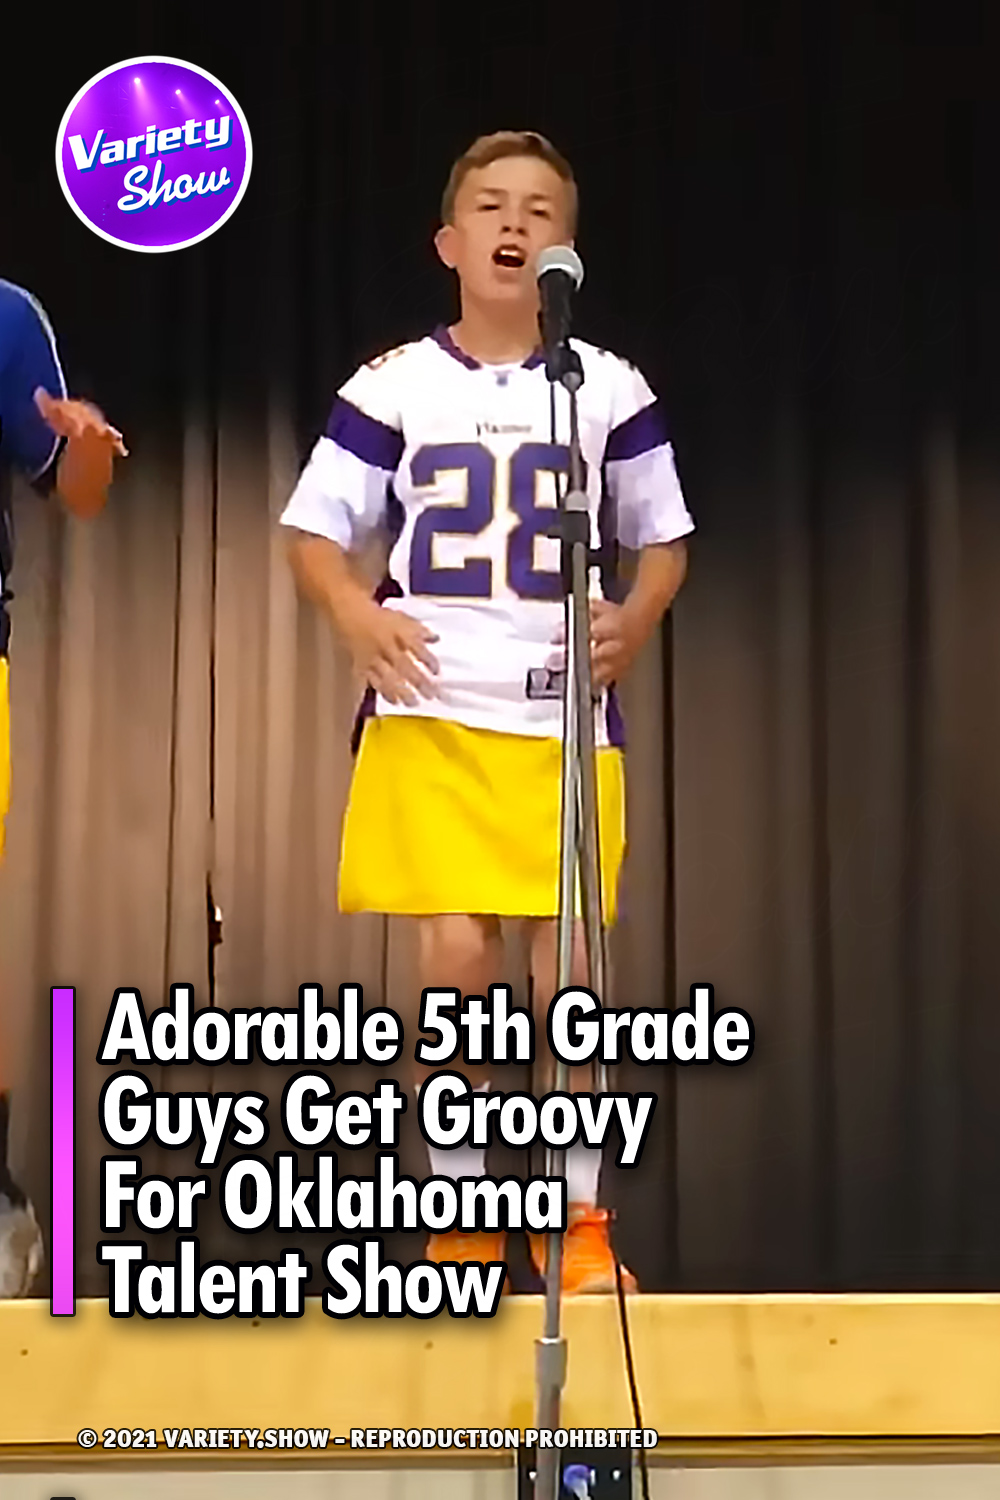 Adorable 5th Grade Guys Get Groovy For Oklahoma Talent Show